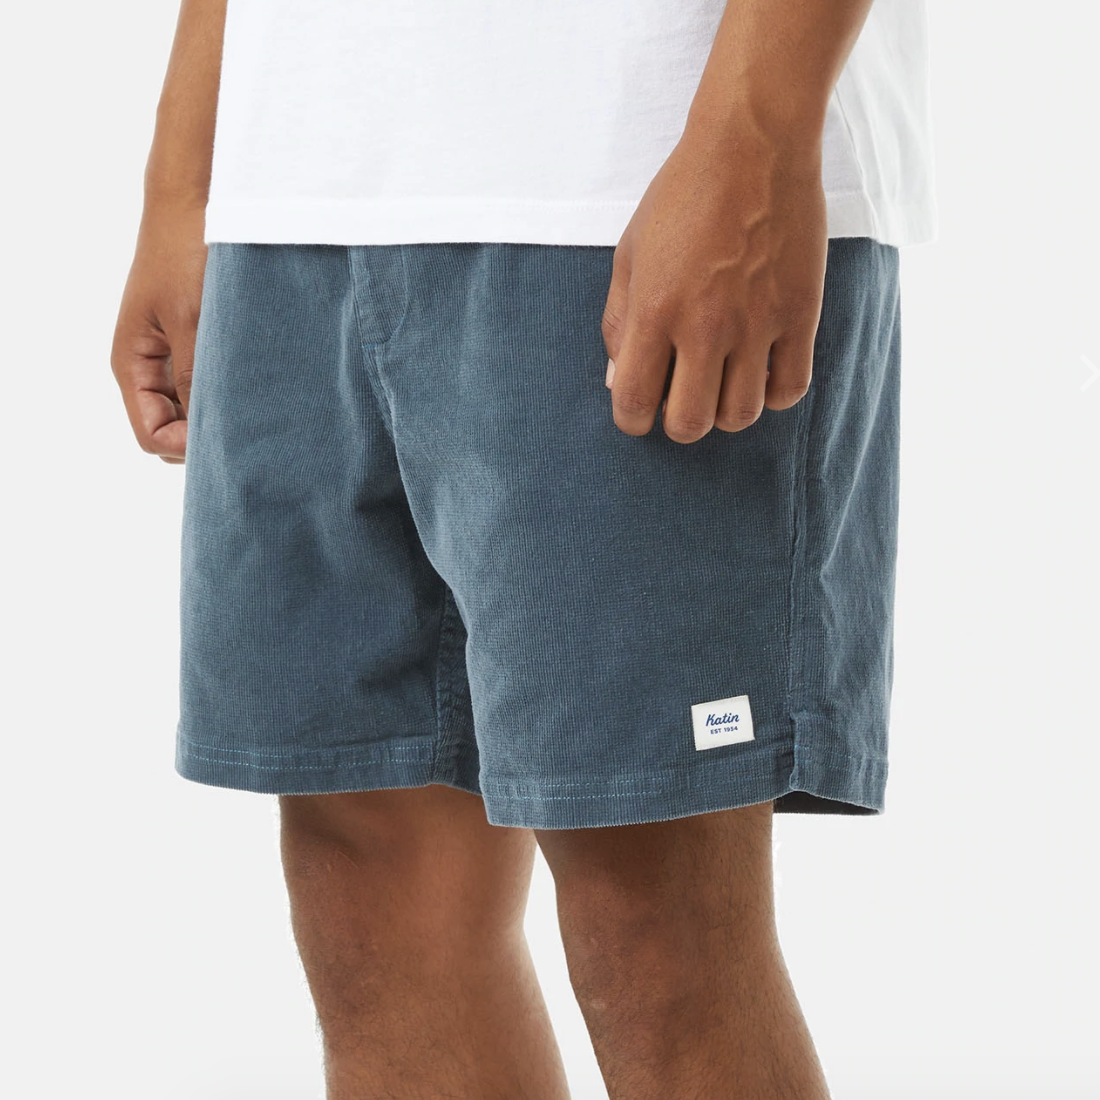 Men's Shorts: Latest Styles, Fashion, Trends, Reviews | GQ